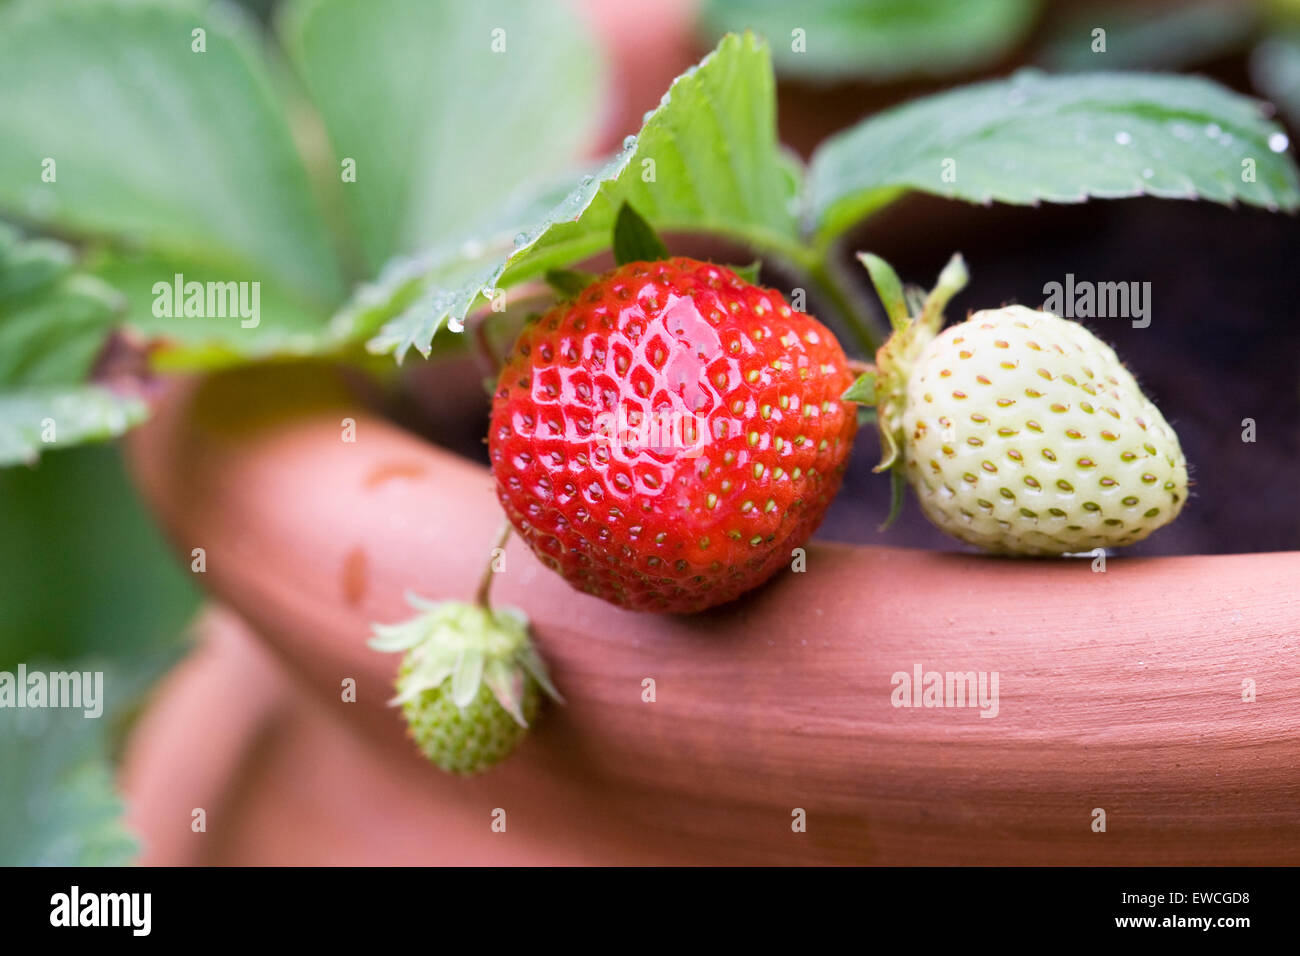 Strawberries growing in a terracotta pot. Stock Photo